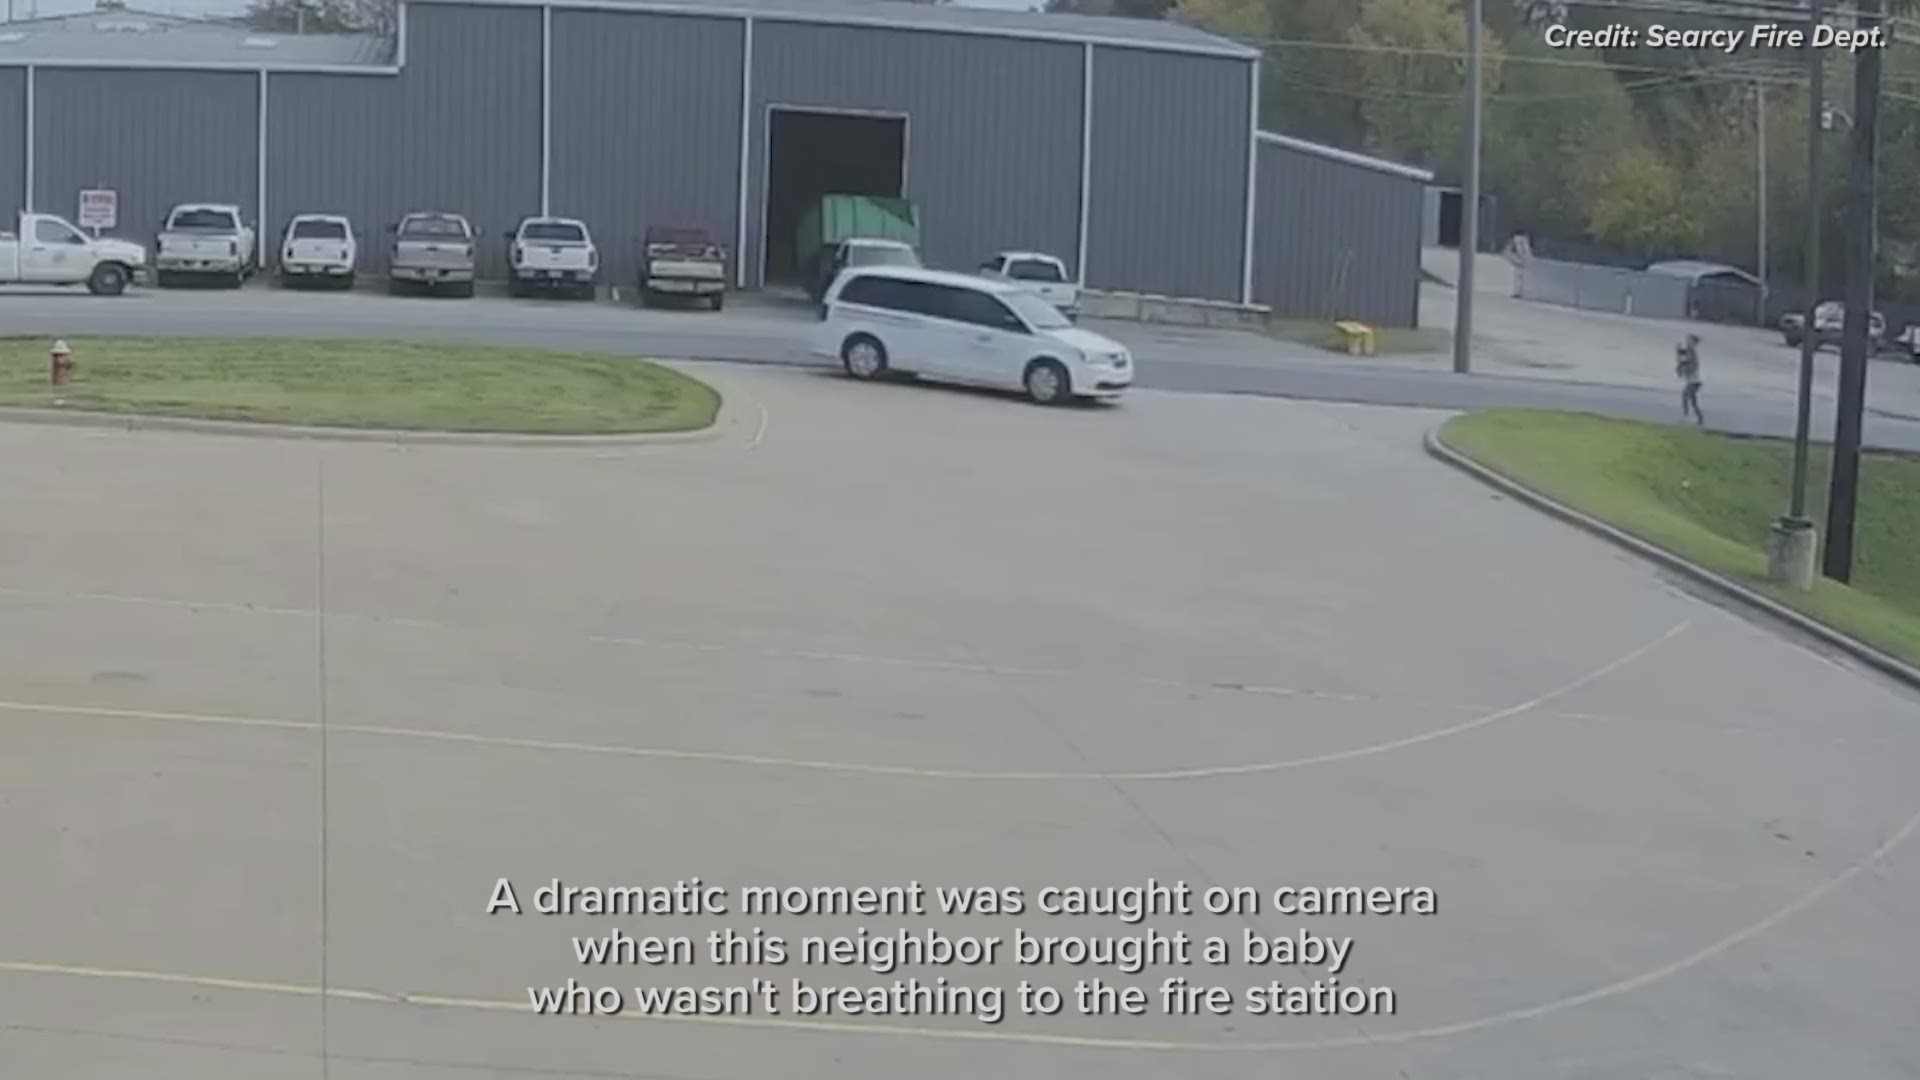 Surveillance footage provided to us by Searcy Fire Department shows the moment firefighters helped save an infant's life.